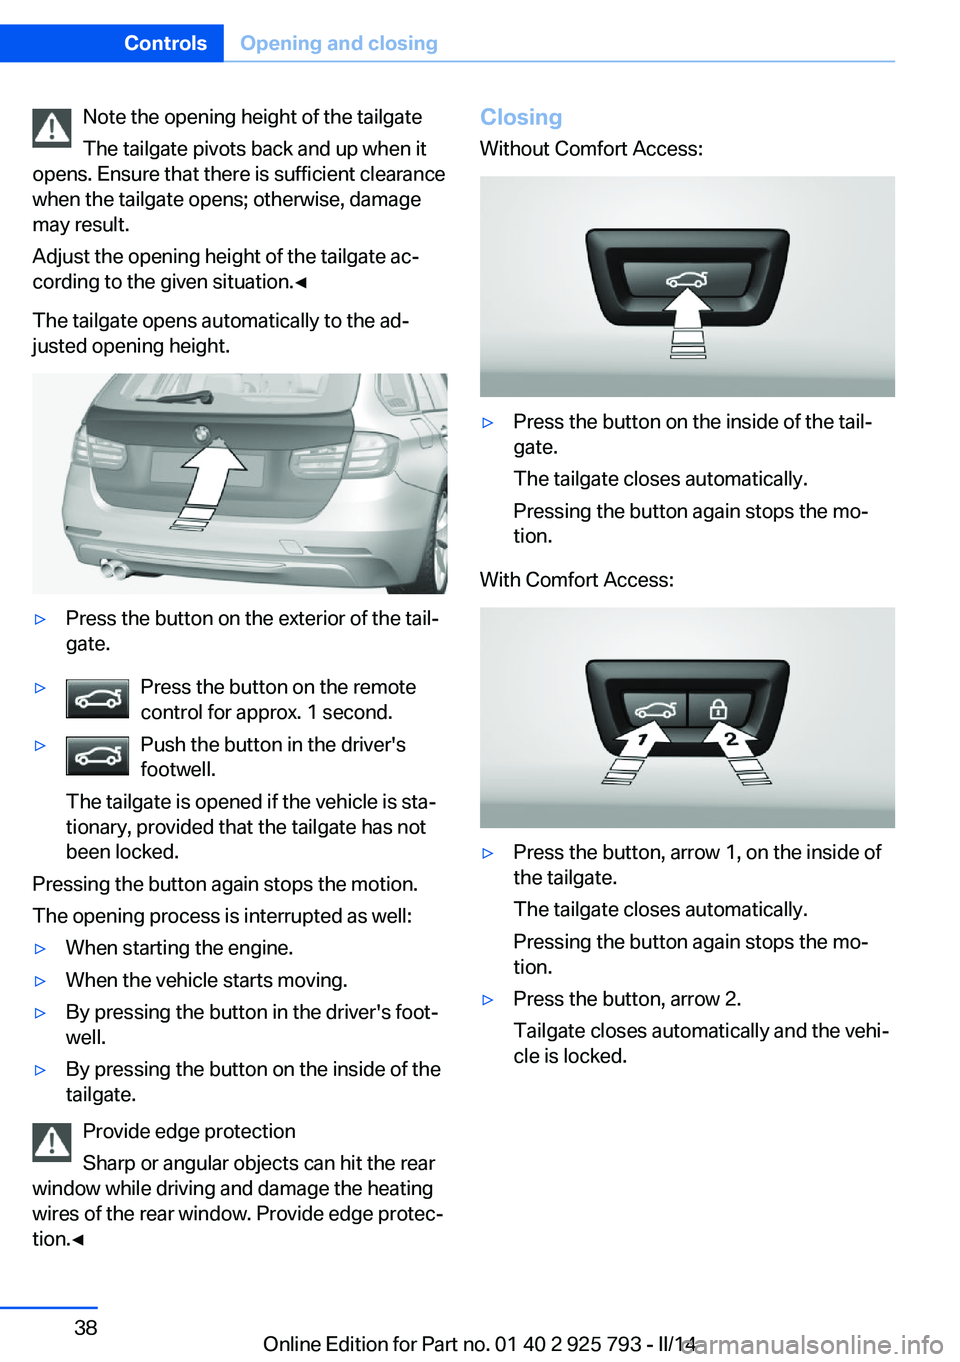 BMW 328D XDRIVE SPORTS WAGON 2014  Owners Manual Note the opening height of the tailgate
The tailgate pivots back and up when it
opens. Ensure that there is sufficient clearance
when the tailgate opens; otherwise, damage
may result.
Adjust the openi